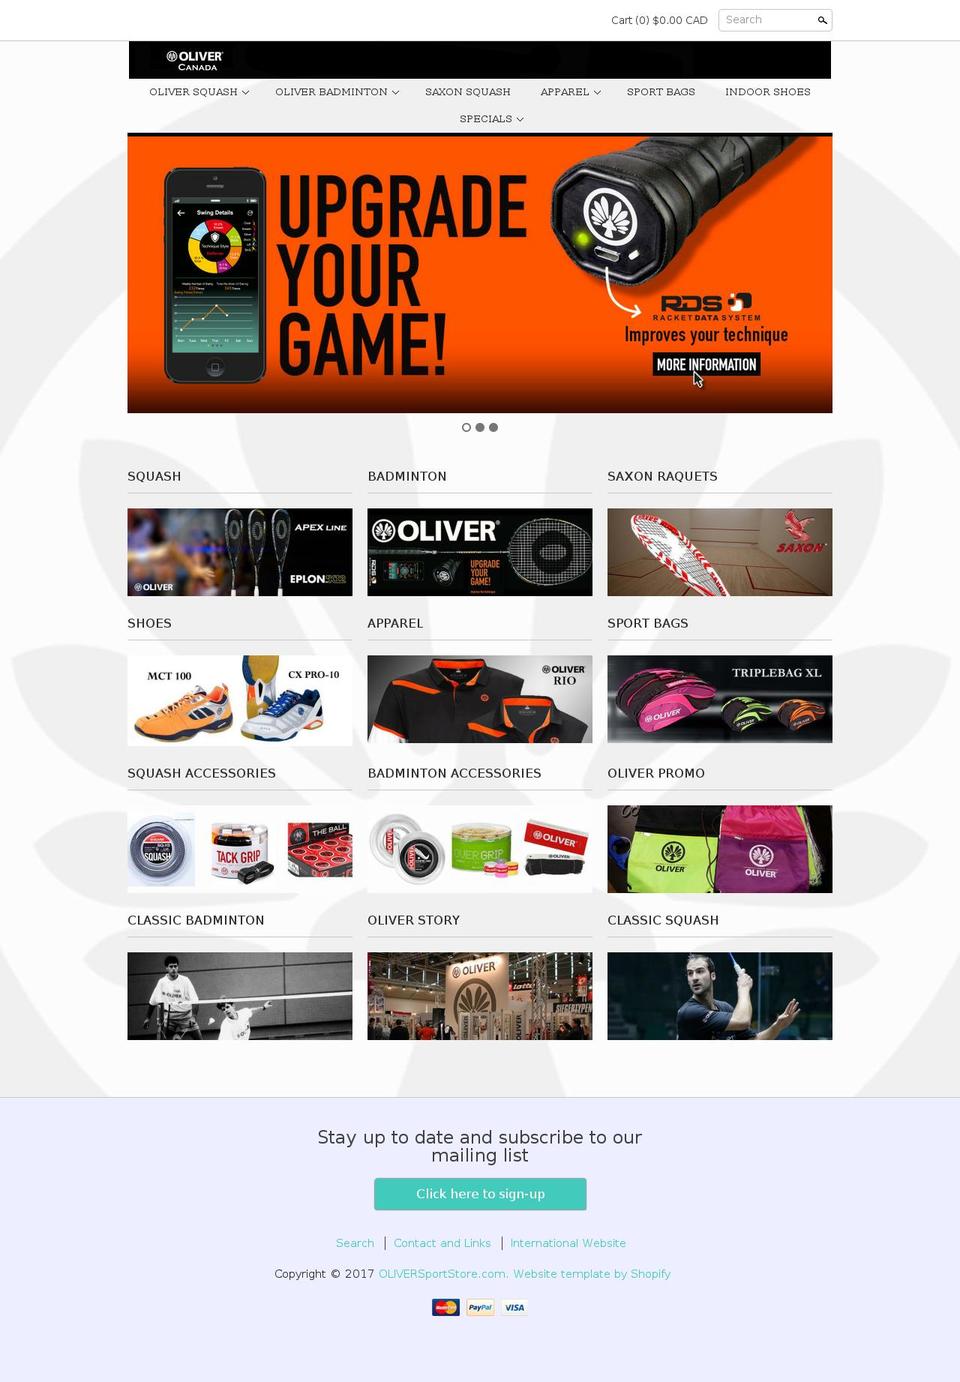 Clean Shopify theme site example oliversportstore.com